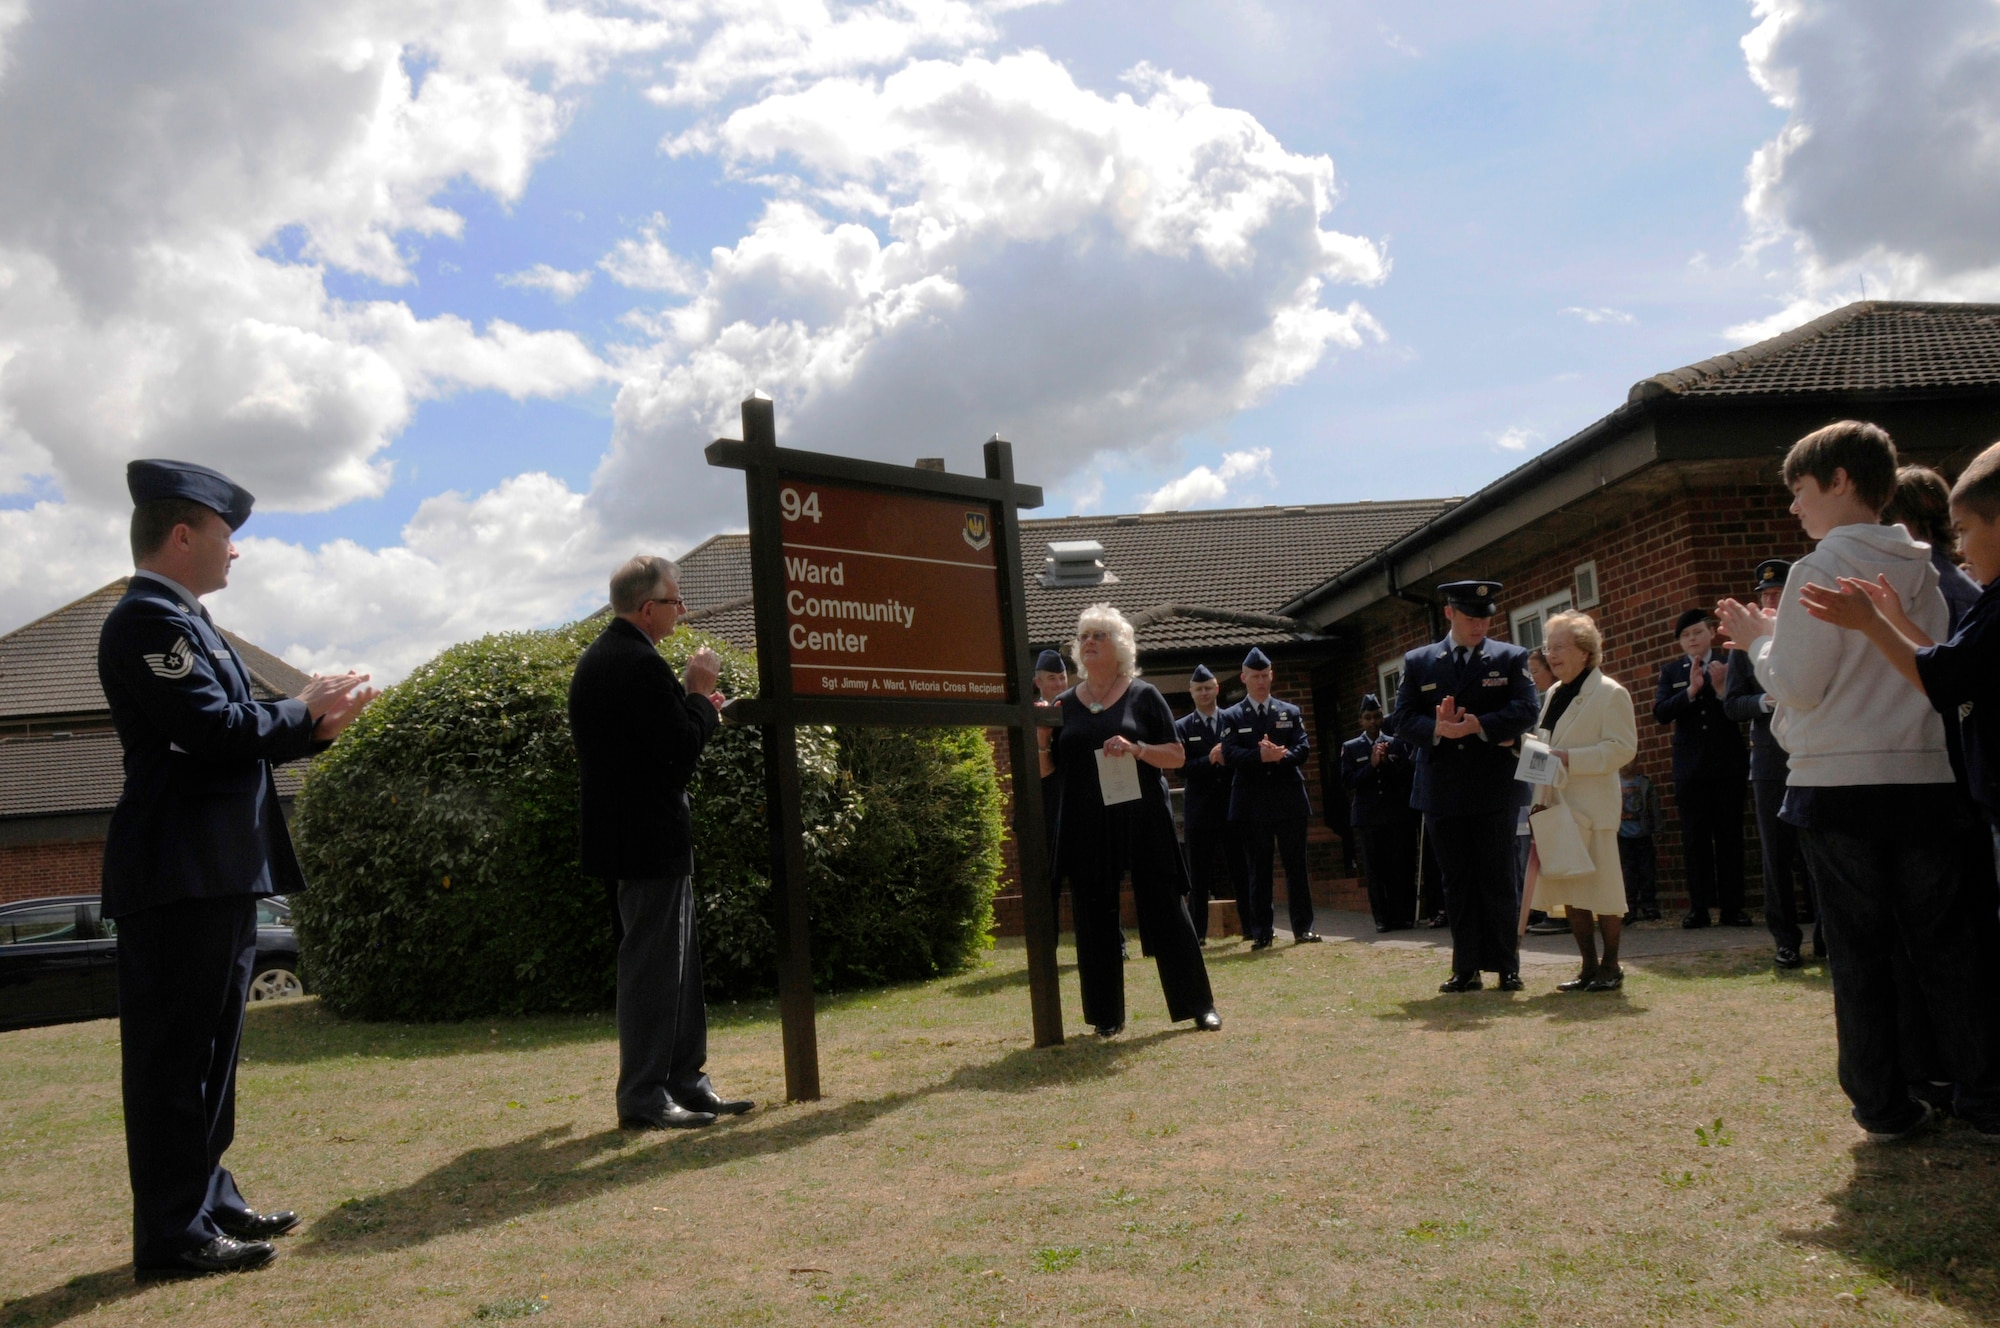 ROYAL AIR FORCE FELTWELL, England -- Members from the Friends of the No. 75 New Zealand Squadron Association, help unveil the new Ward Community Activity Center sign during the building dedication ceremony on May 14, 2011. The building was named in honor of Sgt. James A. Ward, the first New Zealander awarded the Victoria Cross; the British equivalent of the Medal of Honor. Sergeant Ward was stationed at RAF Feltwell with the Royal New Zealand Air Force No. 75 Squadron during World War II. He was awarded the medal for his heroic actions on July 7, 1941, when his Wellington bomber caught fire from an enemy attack. (U.S. Air Force photo/Staff Sgt. Connor Estes)